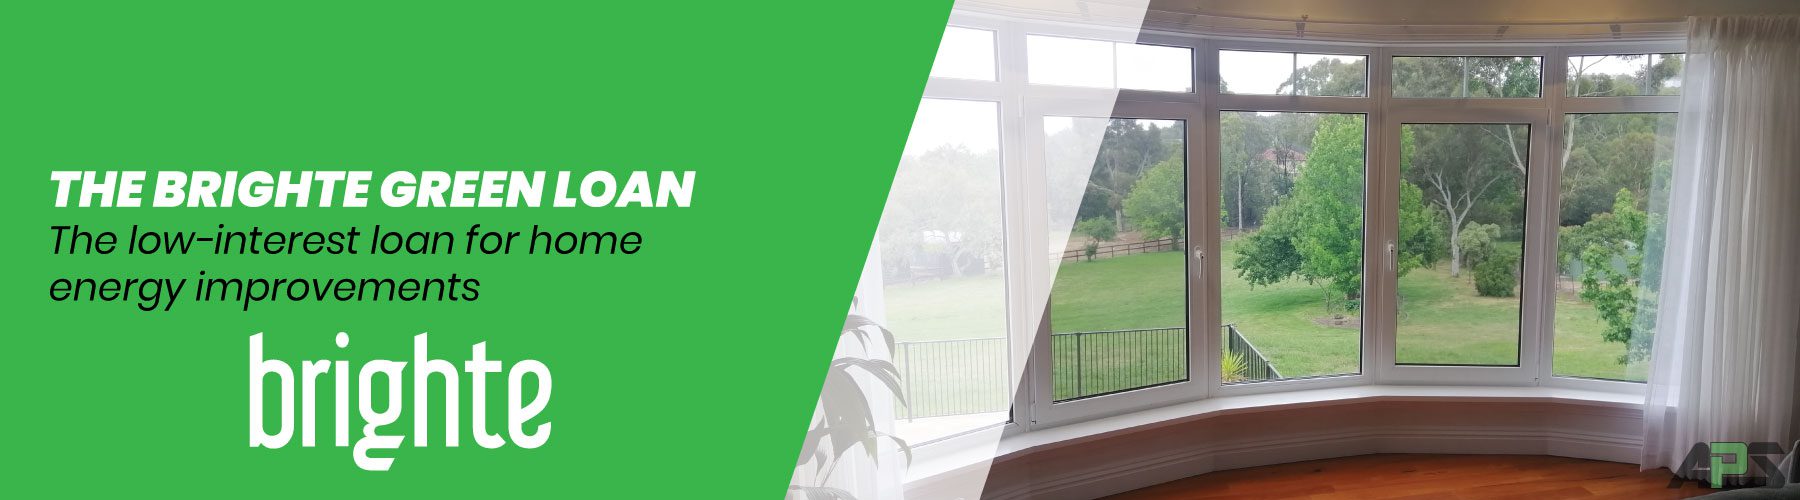 THE BRIGHTE GREEN LOAN at APS Double Glazing